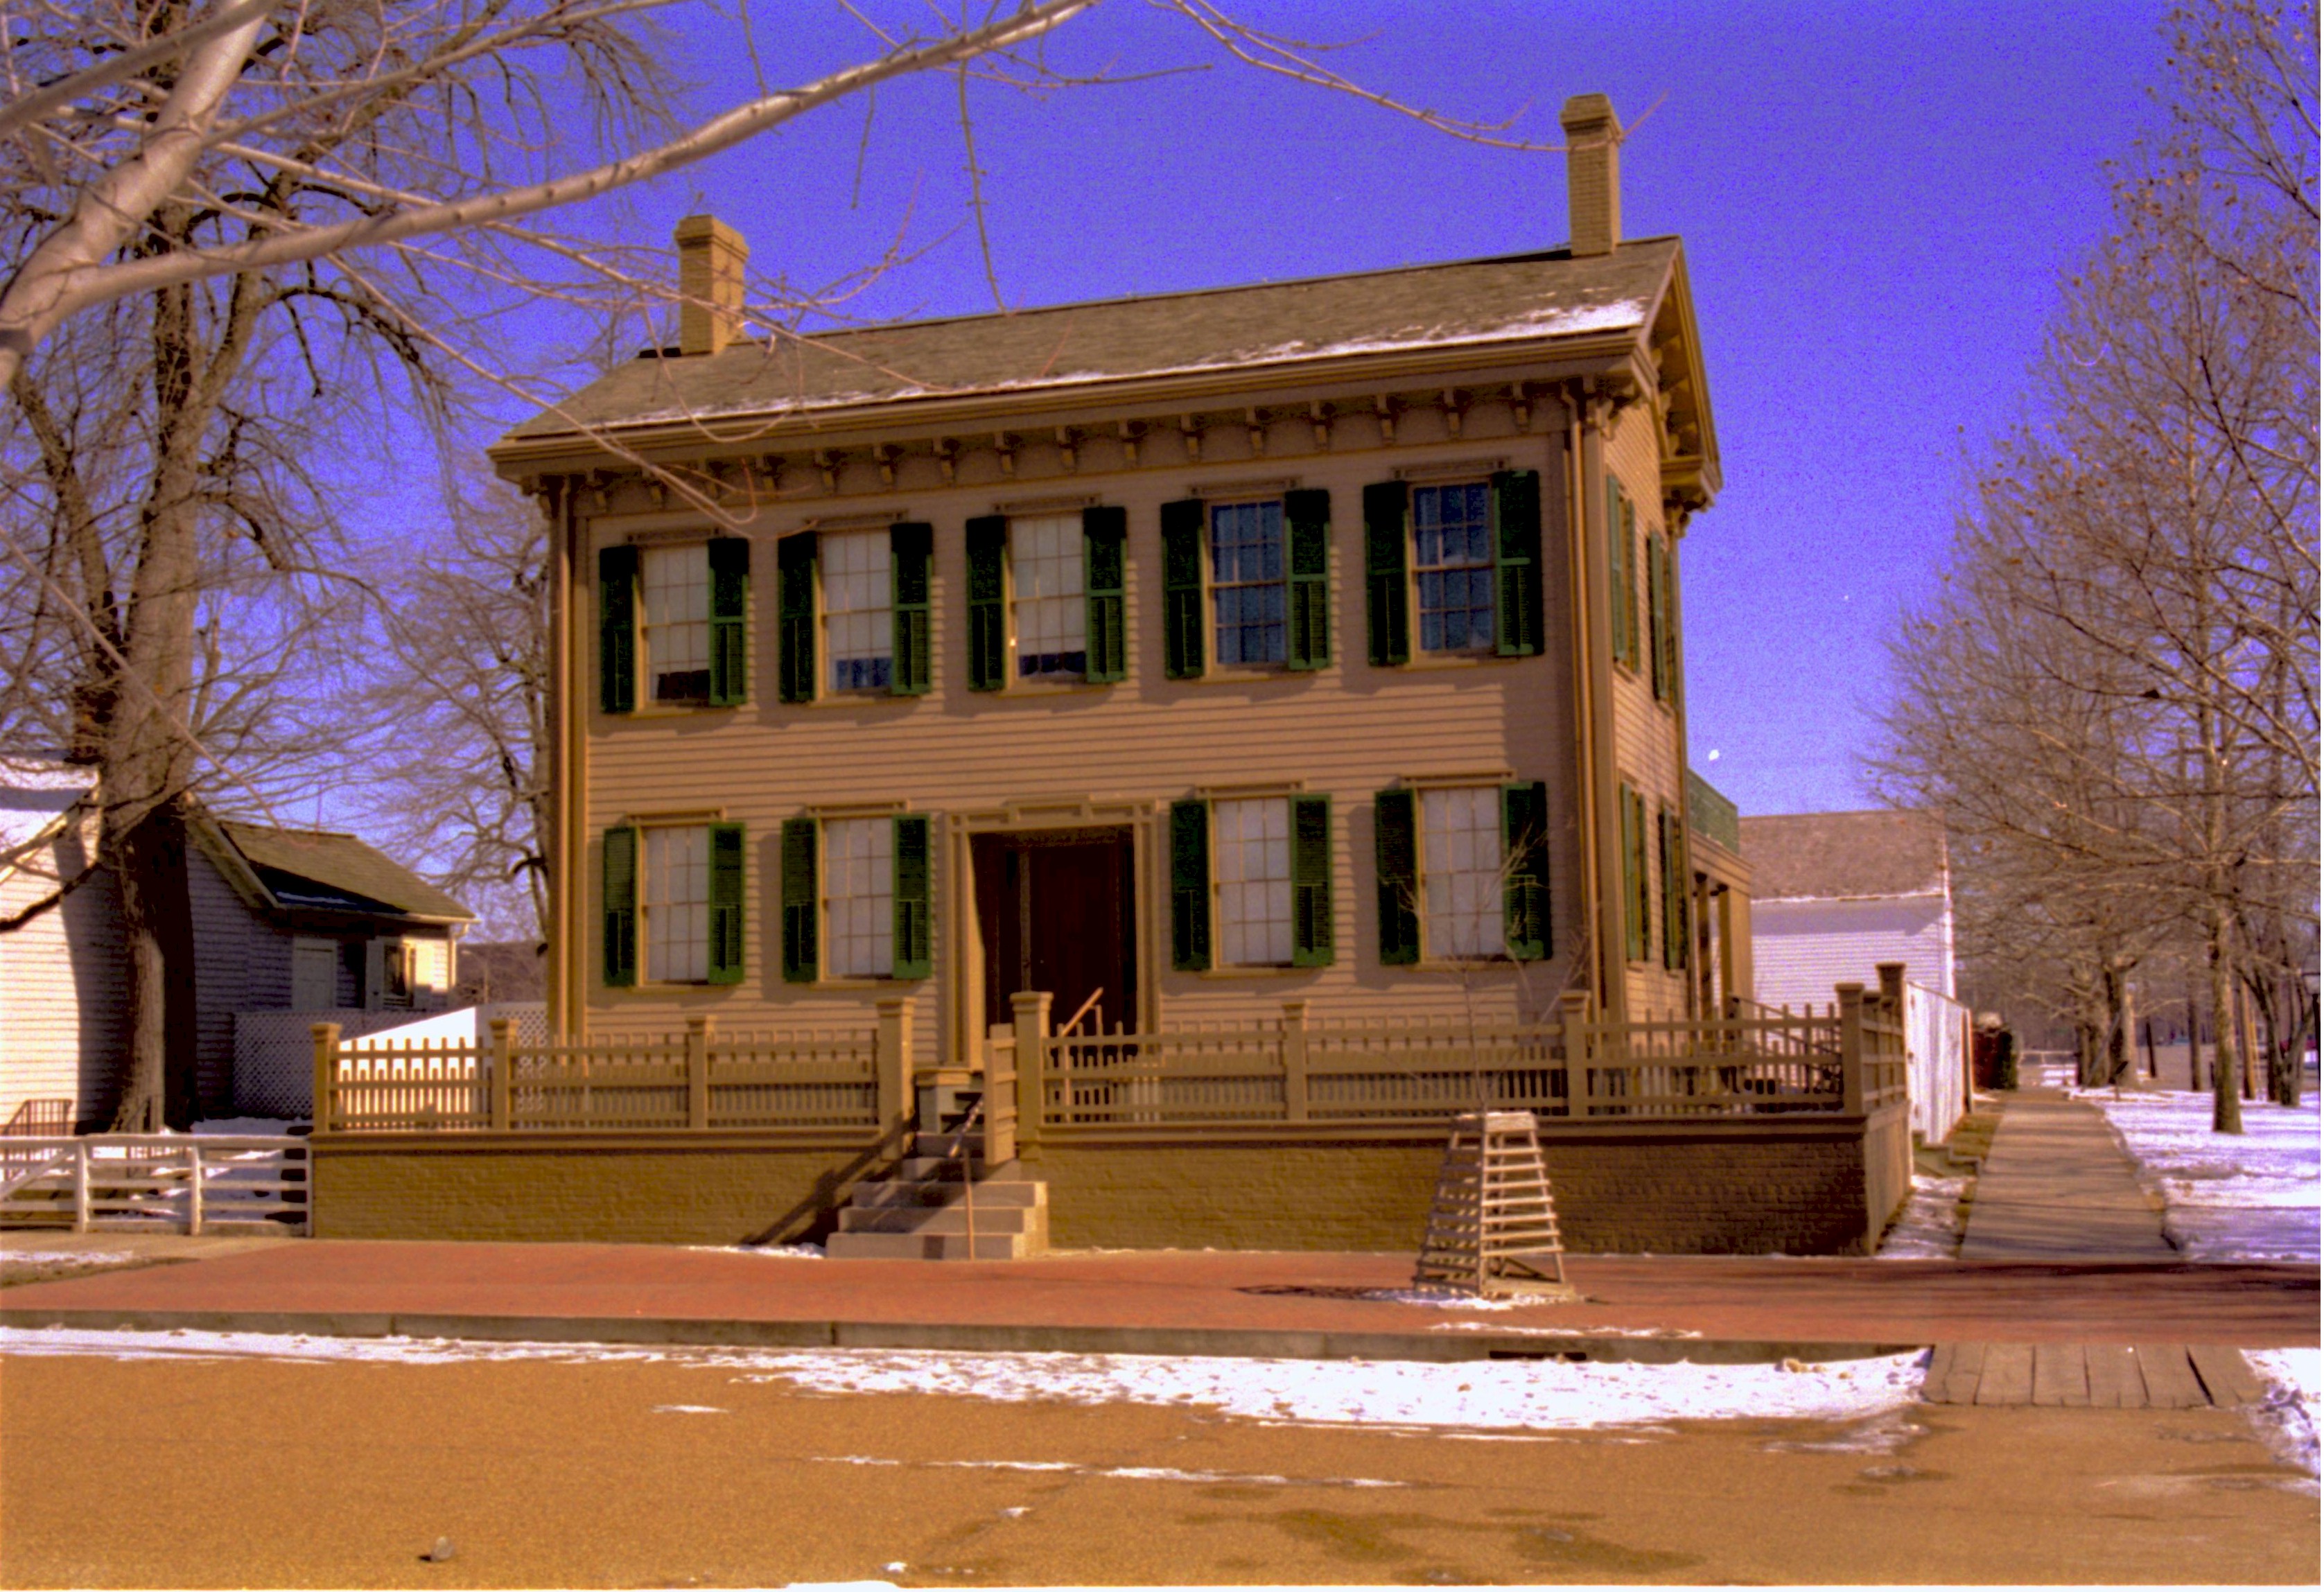 Lincoln Home in winter, snow scattered throughout. Cleared brick plaza in front, elm tree in cage on plaza.  Corneau House on left. Cleared boardwalk along side of hosue. Lincoln Barn in bacground right Looking East from 8th and Jackson Street intersection snow, Lincoln Home, Corneau, Lincoln Barn, 8th Street, Jackson Street, brick plaza, elm tree